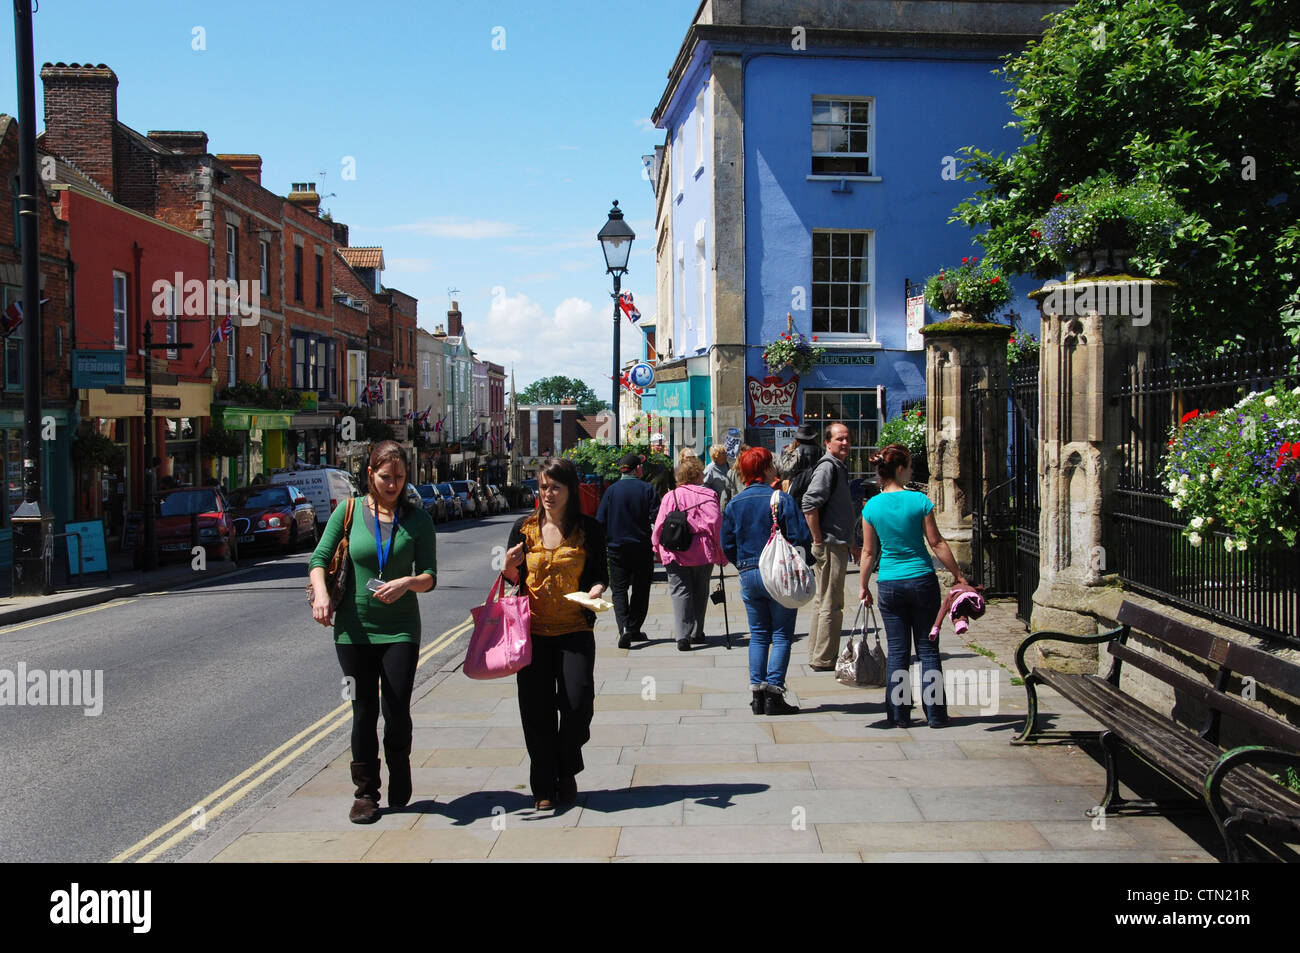 Colourful people in Glastonbury High Street Somerset England Stock Photo